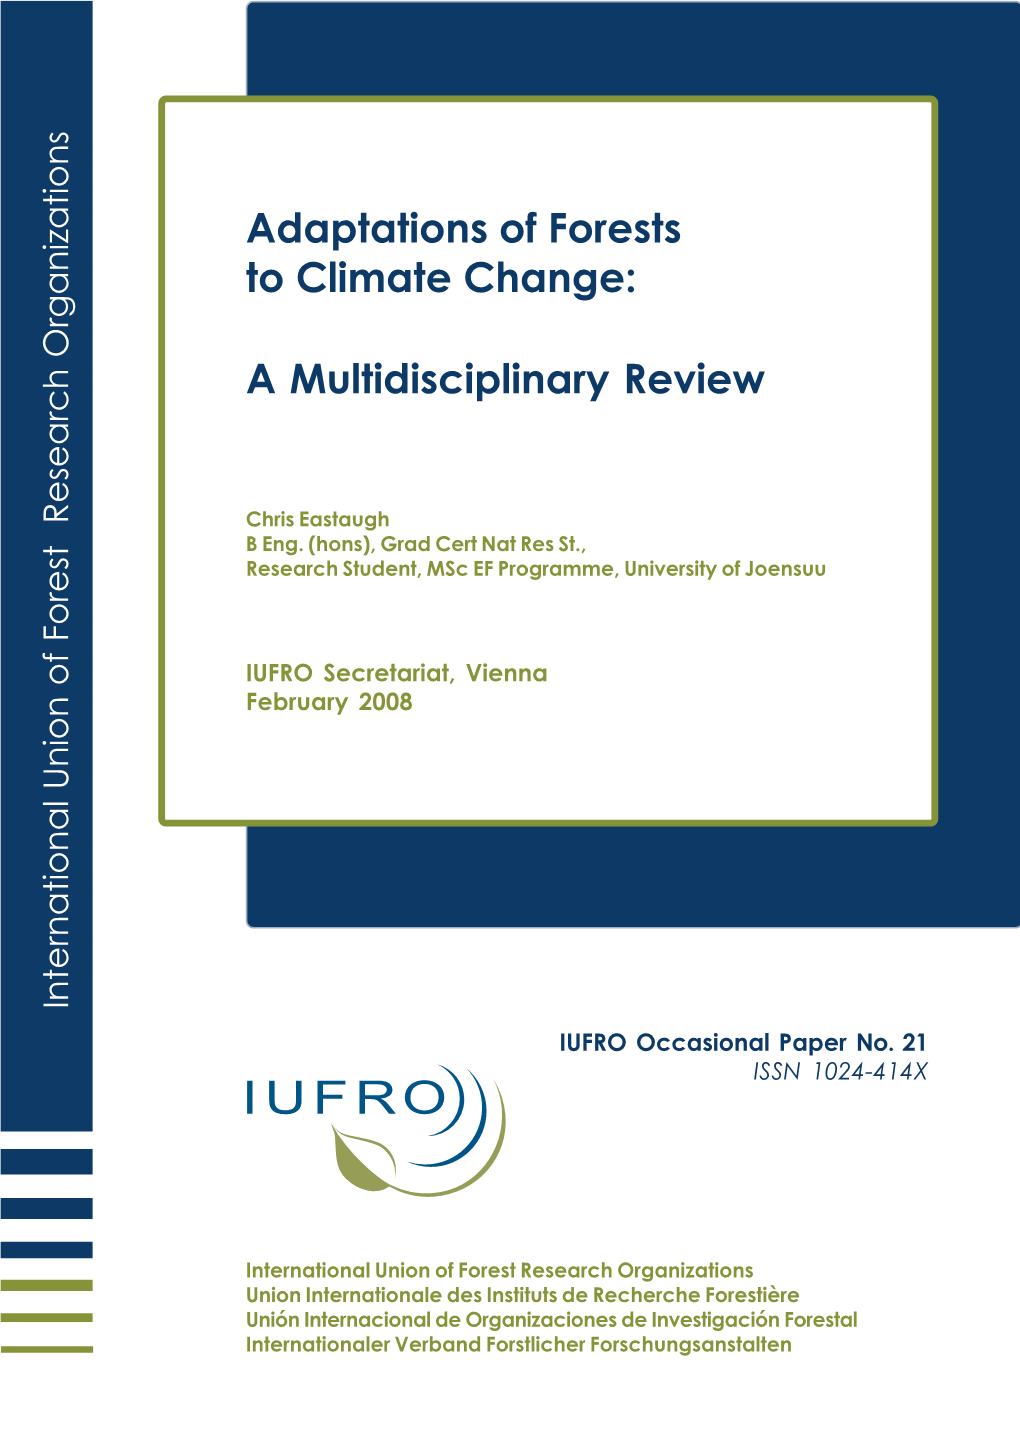 Adaptations of Forests to Climate Change: a Multidisciplinary Review